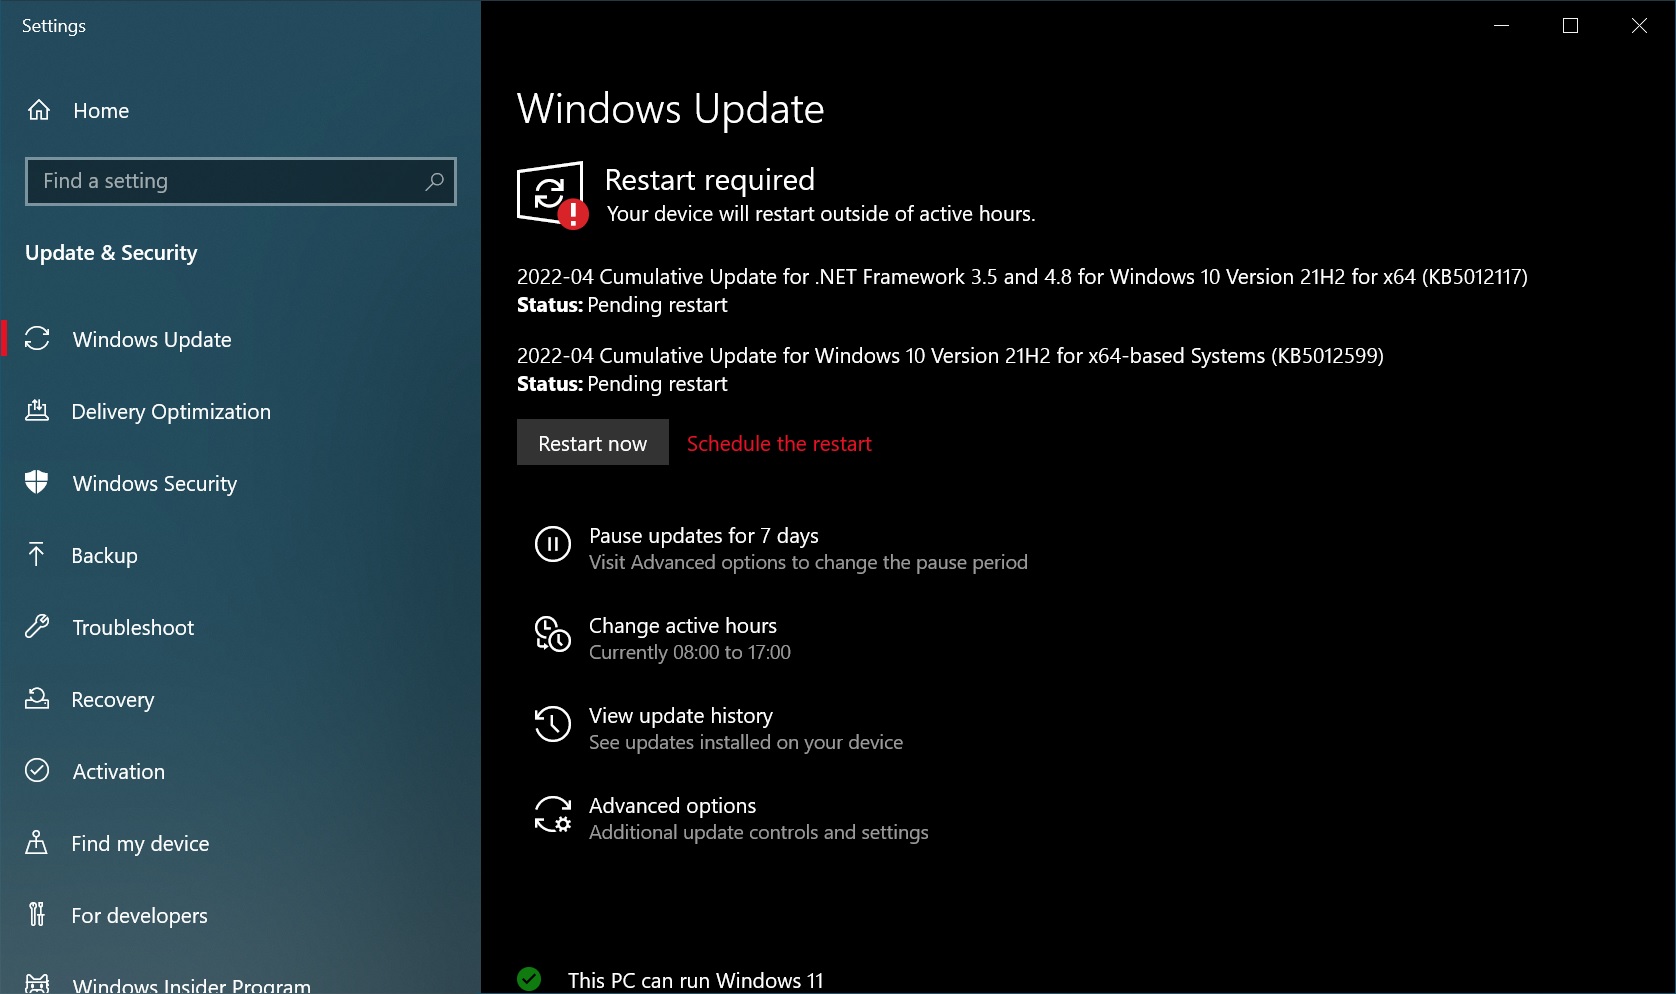 Windows 10 KB5012599 (21H2, 21H1) released with new features KB5012599-Windows-10-Update.jpg